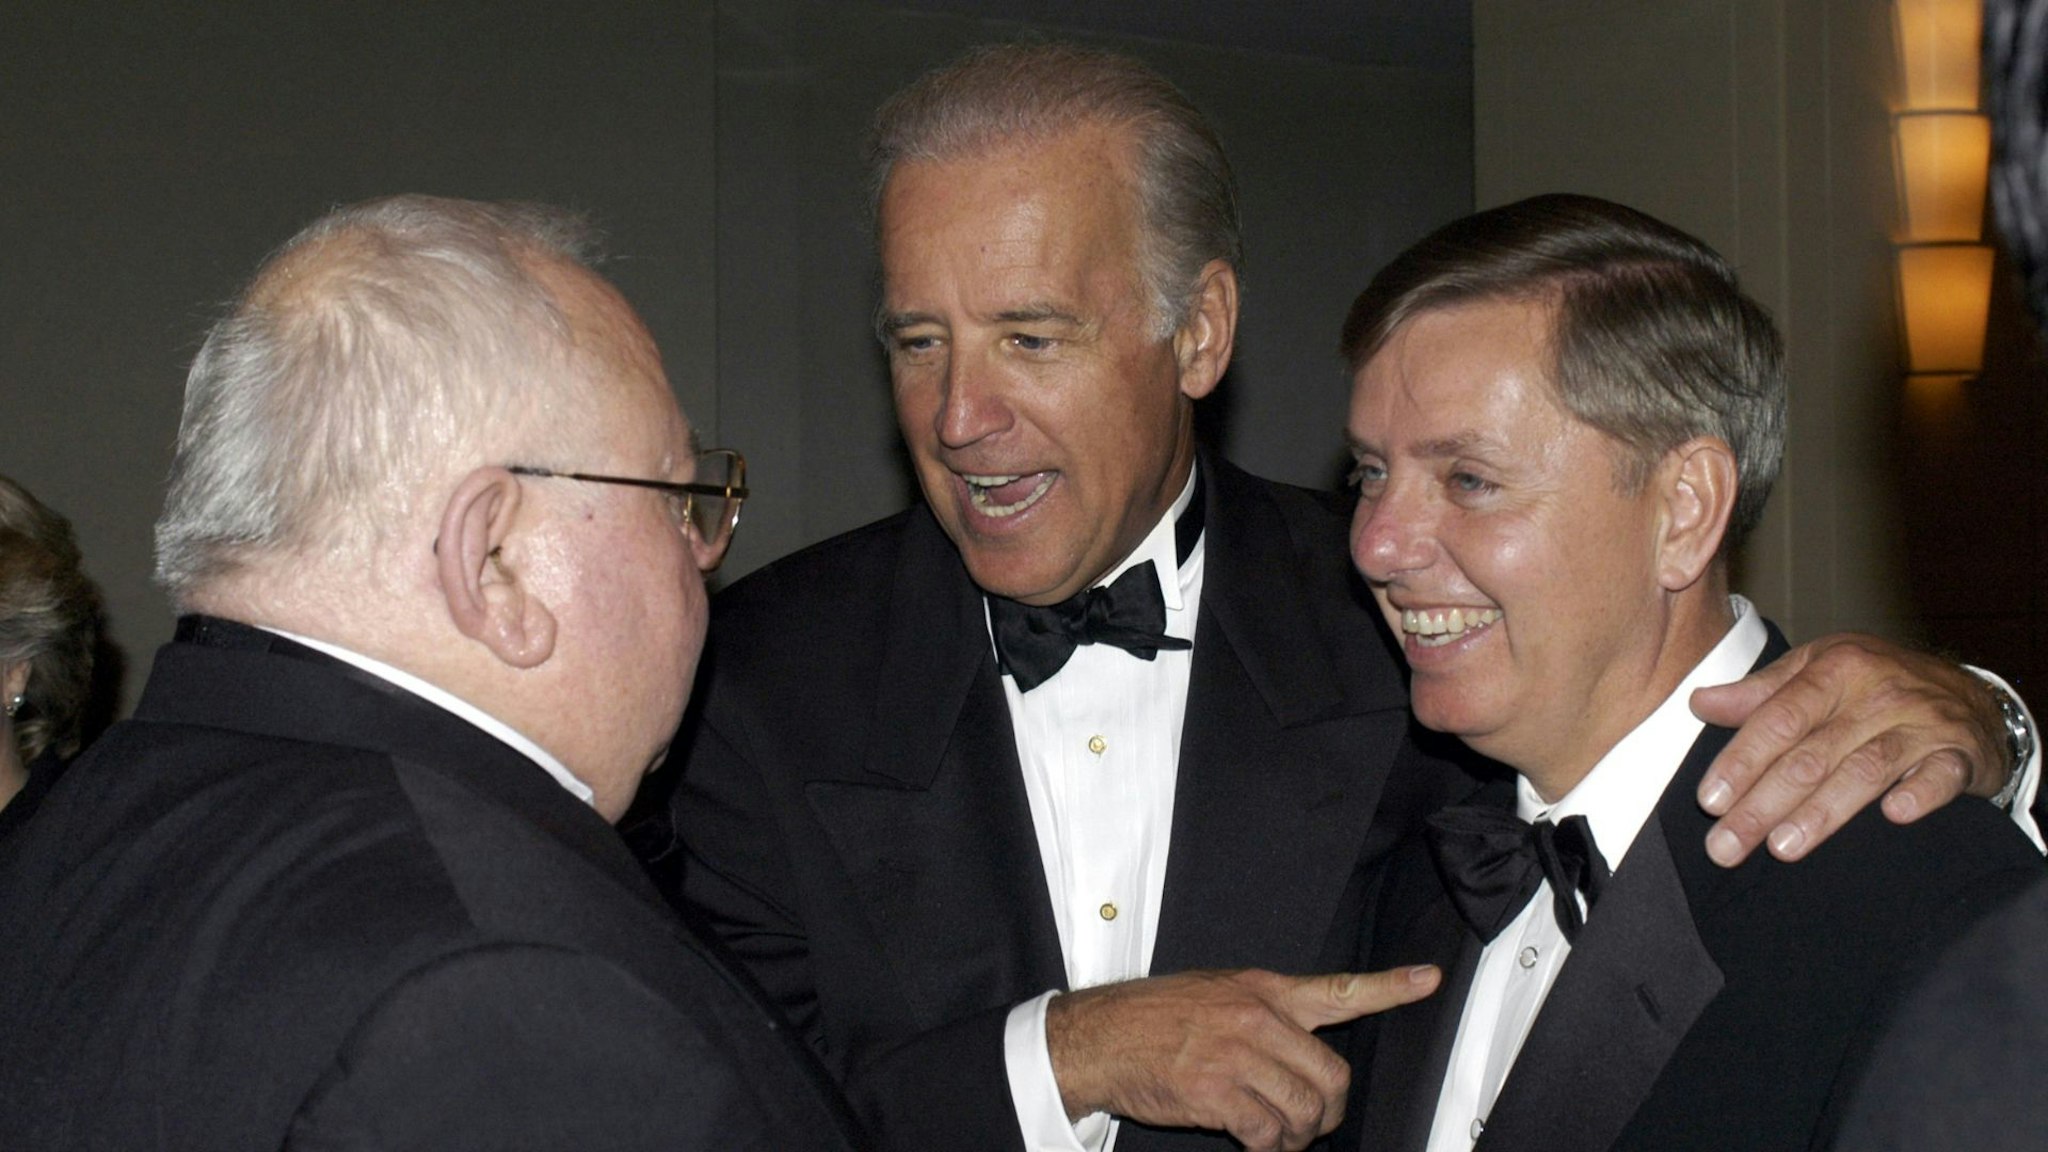 WASHINGTON - APRIL 14: (US TABS AND HOLLYWOOD REPORTER OUT) (L-R) Lee Ewing of Aerospace Daily, U.S. Senator Joseph Biden (D-DE) and U.S. Senator Lindsey Graham (R-SC) attend the American News Women's Club 12th Annual Roast & Toast where Bob Schieffer received the 2004 ANWC Helen Thomas Award For Excellence in Journalism or Outstanding Public Service on April 14, 2004 in Washington, DC.